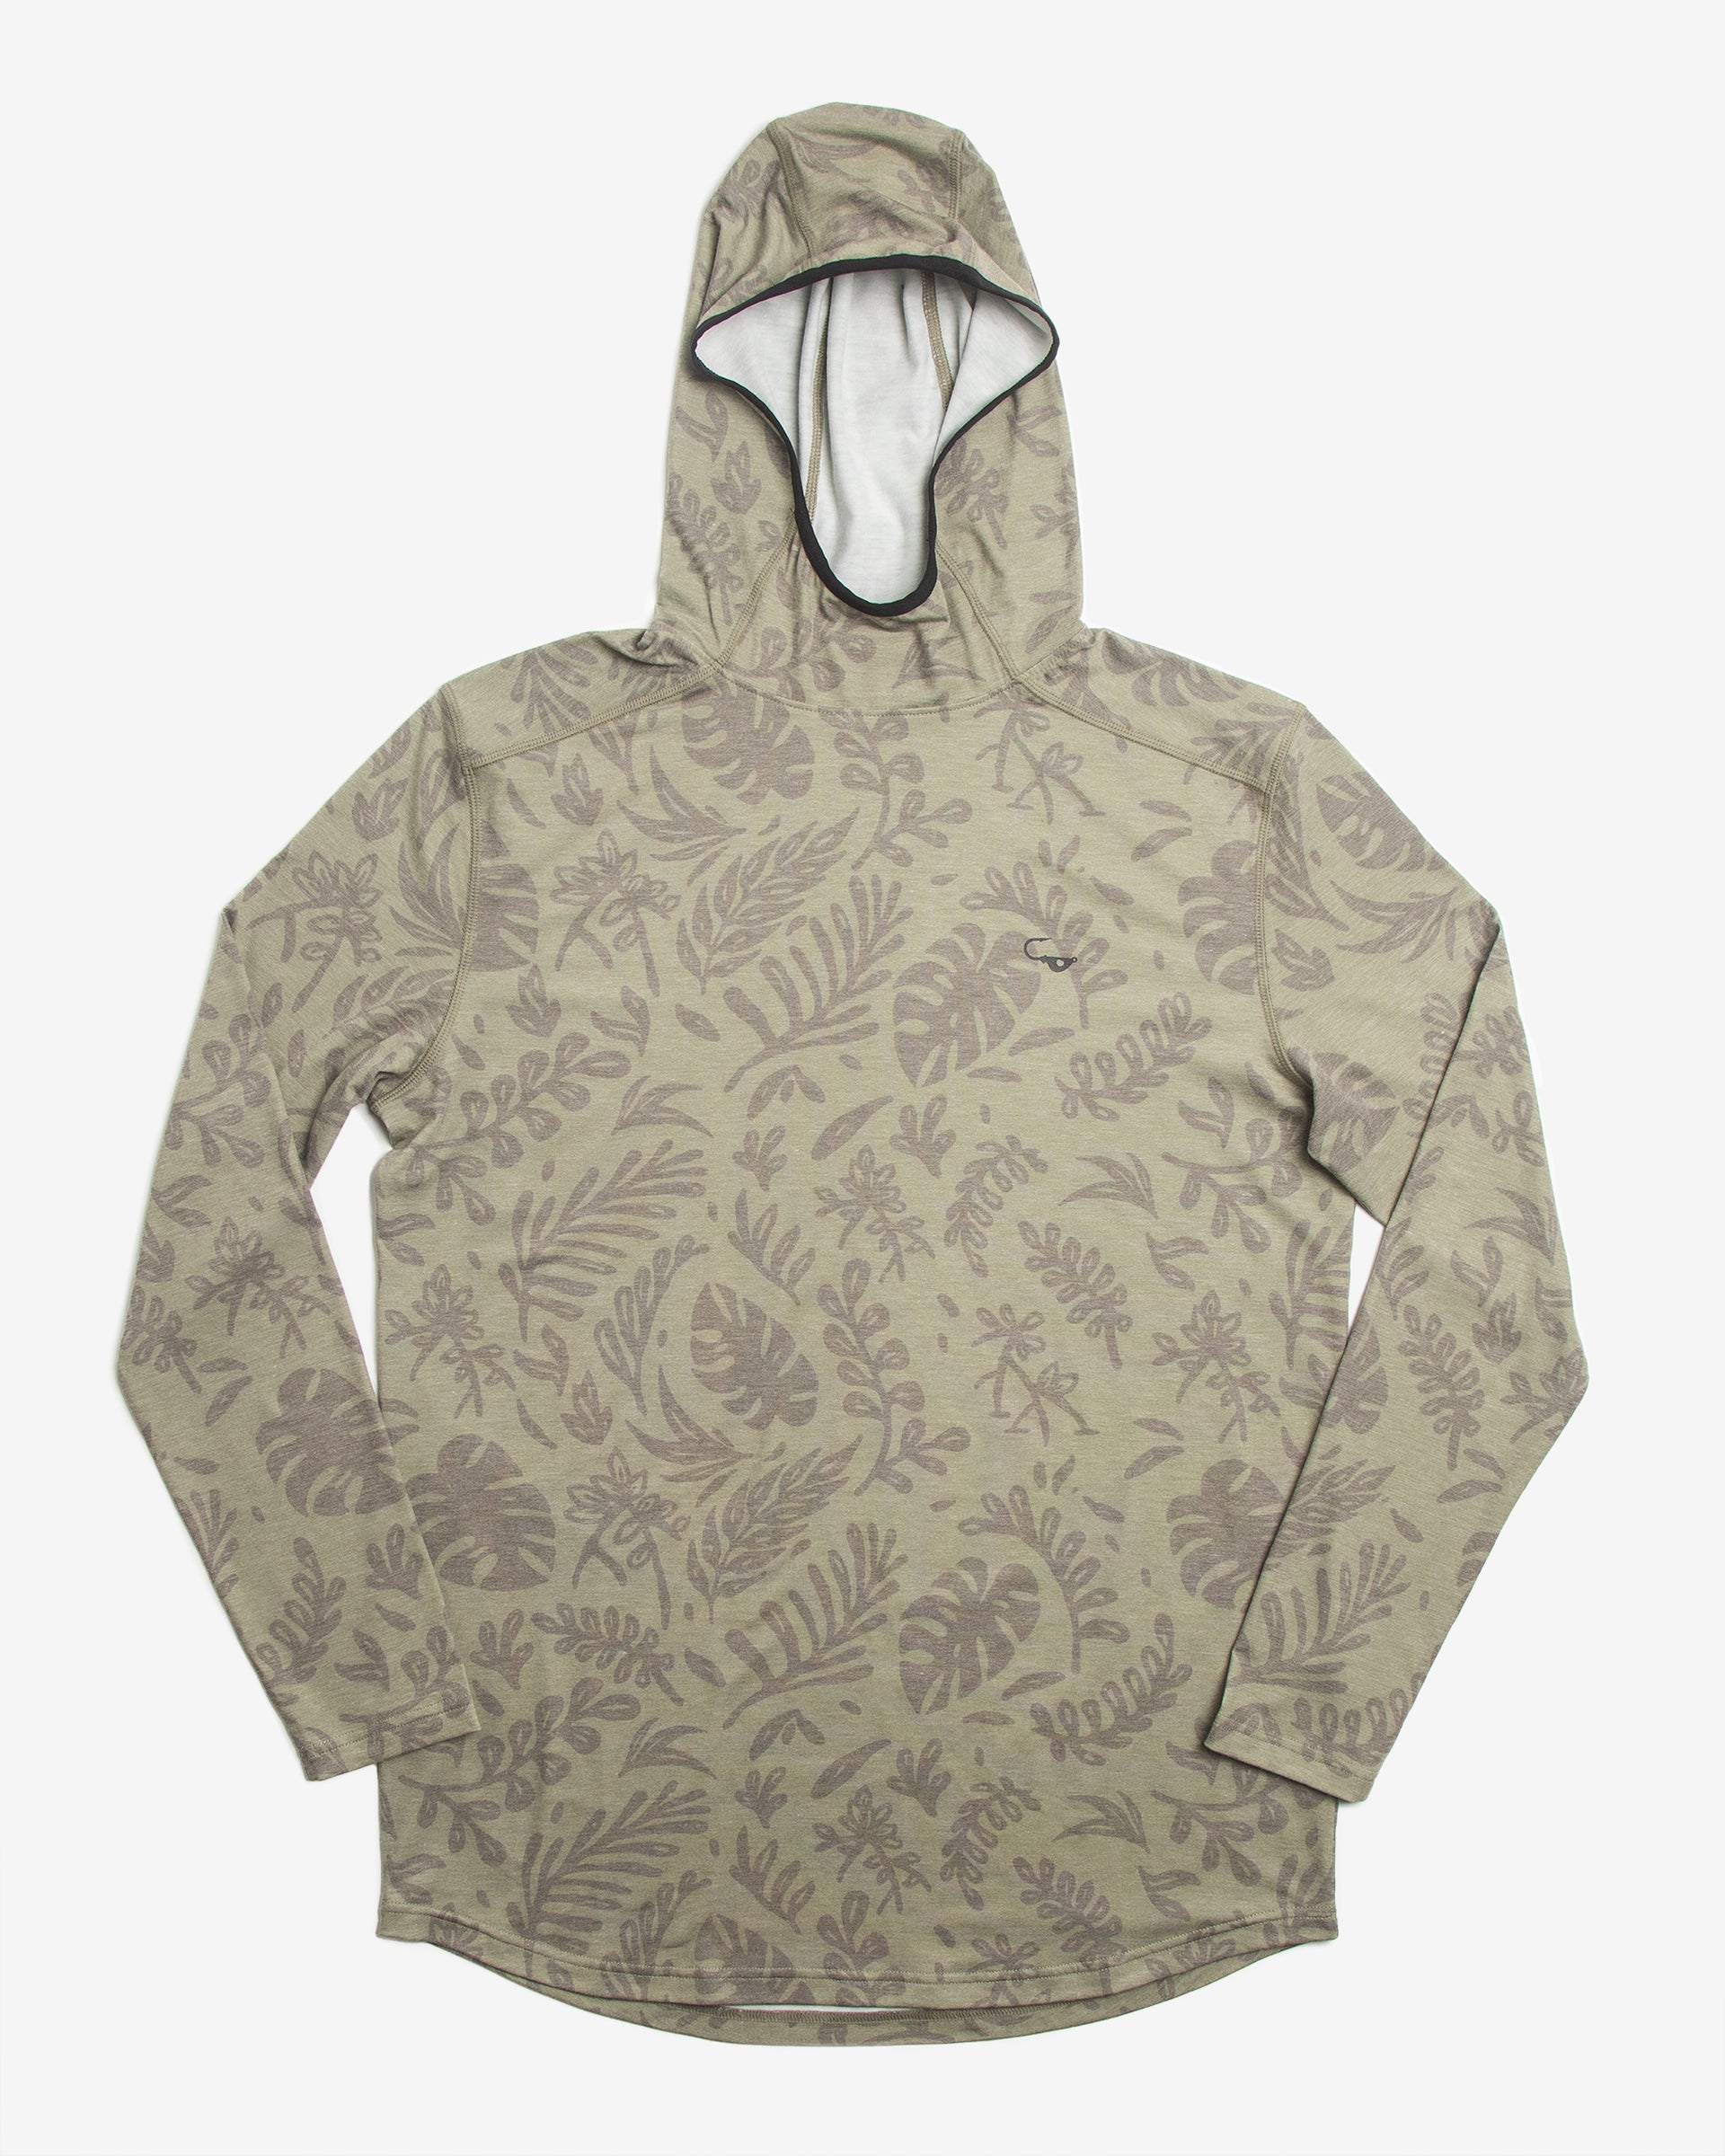 Flat view of the Jigalode Mighty Jig Performance Fishing Hoodie in moss green with an all-over tropical plant pattern. The hoodie, designed for optimal performance, combines style with functionality. It provides UPF 30 sun protection, moisture-wicking properties, and features a super soft fabric.